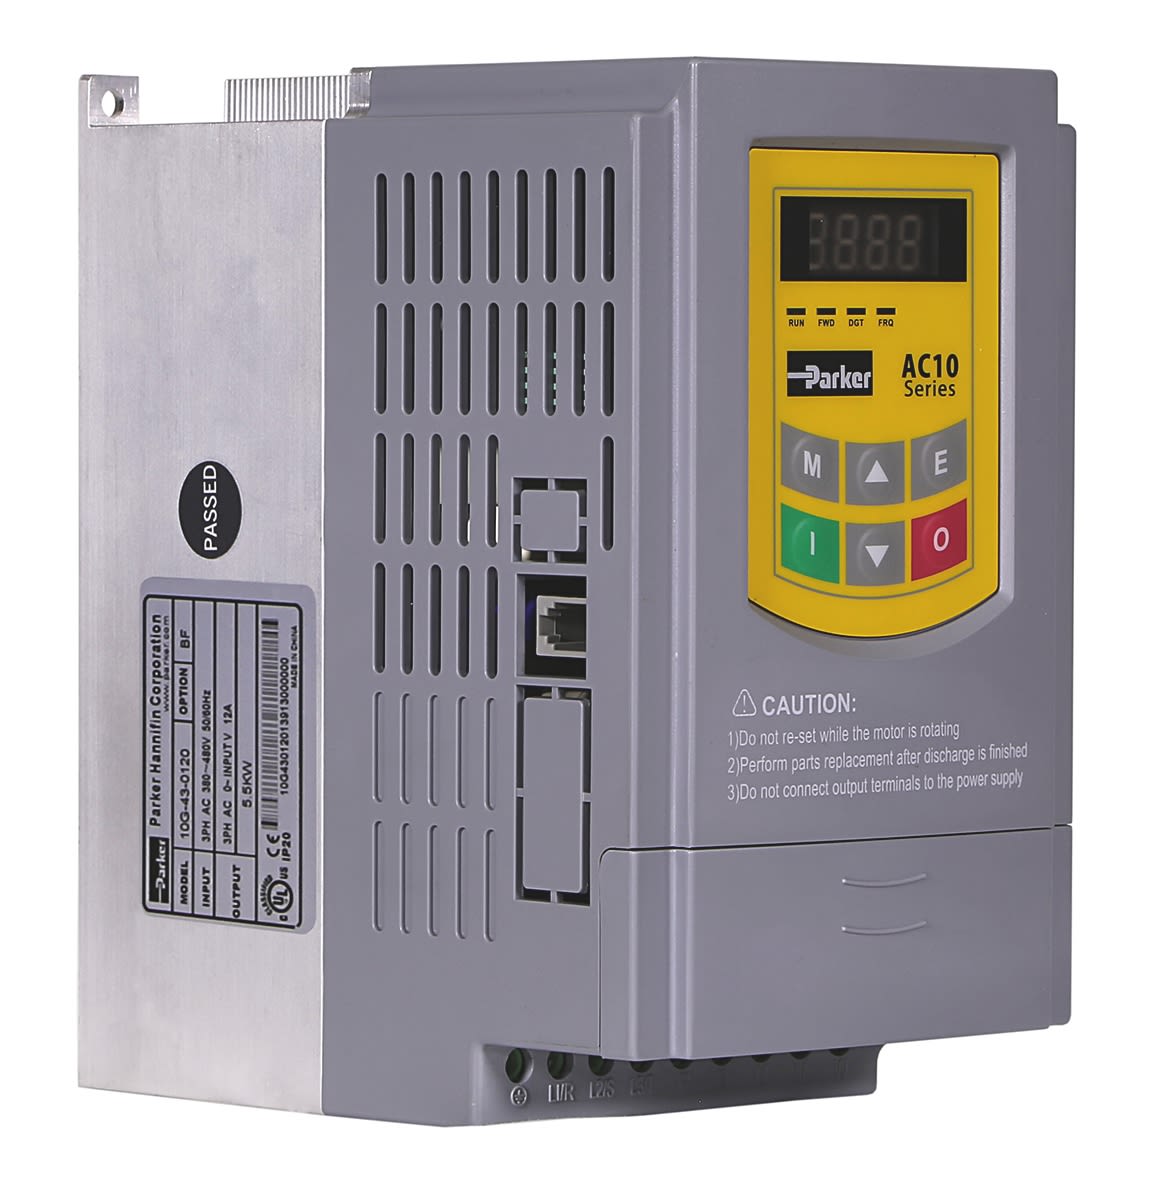 Parker AC10 Inverter Drive, 3-Phase In, 0.5 → 590Hz Out, 1.1 kW, 400 V ac, 6 A